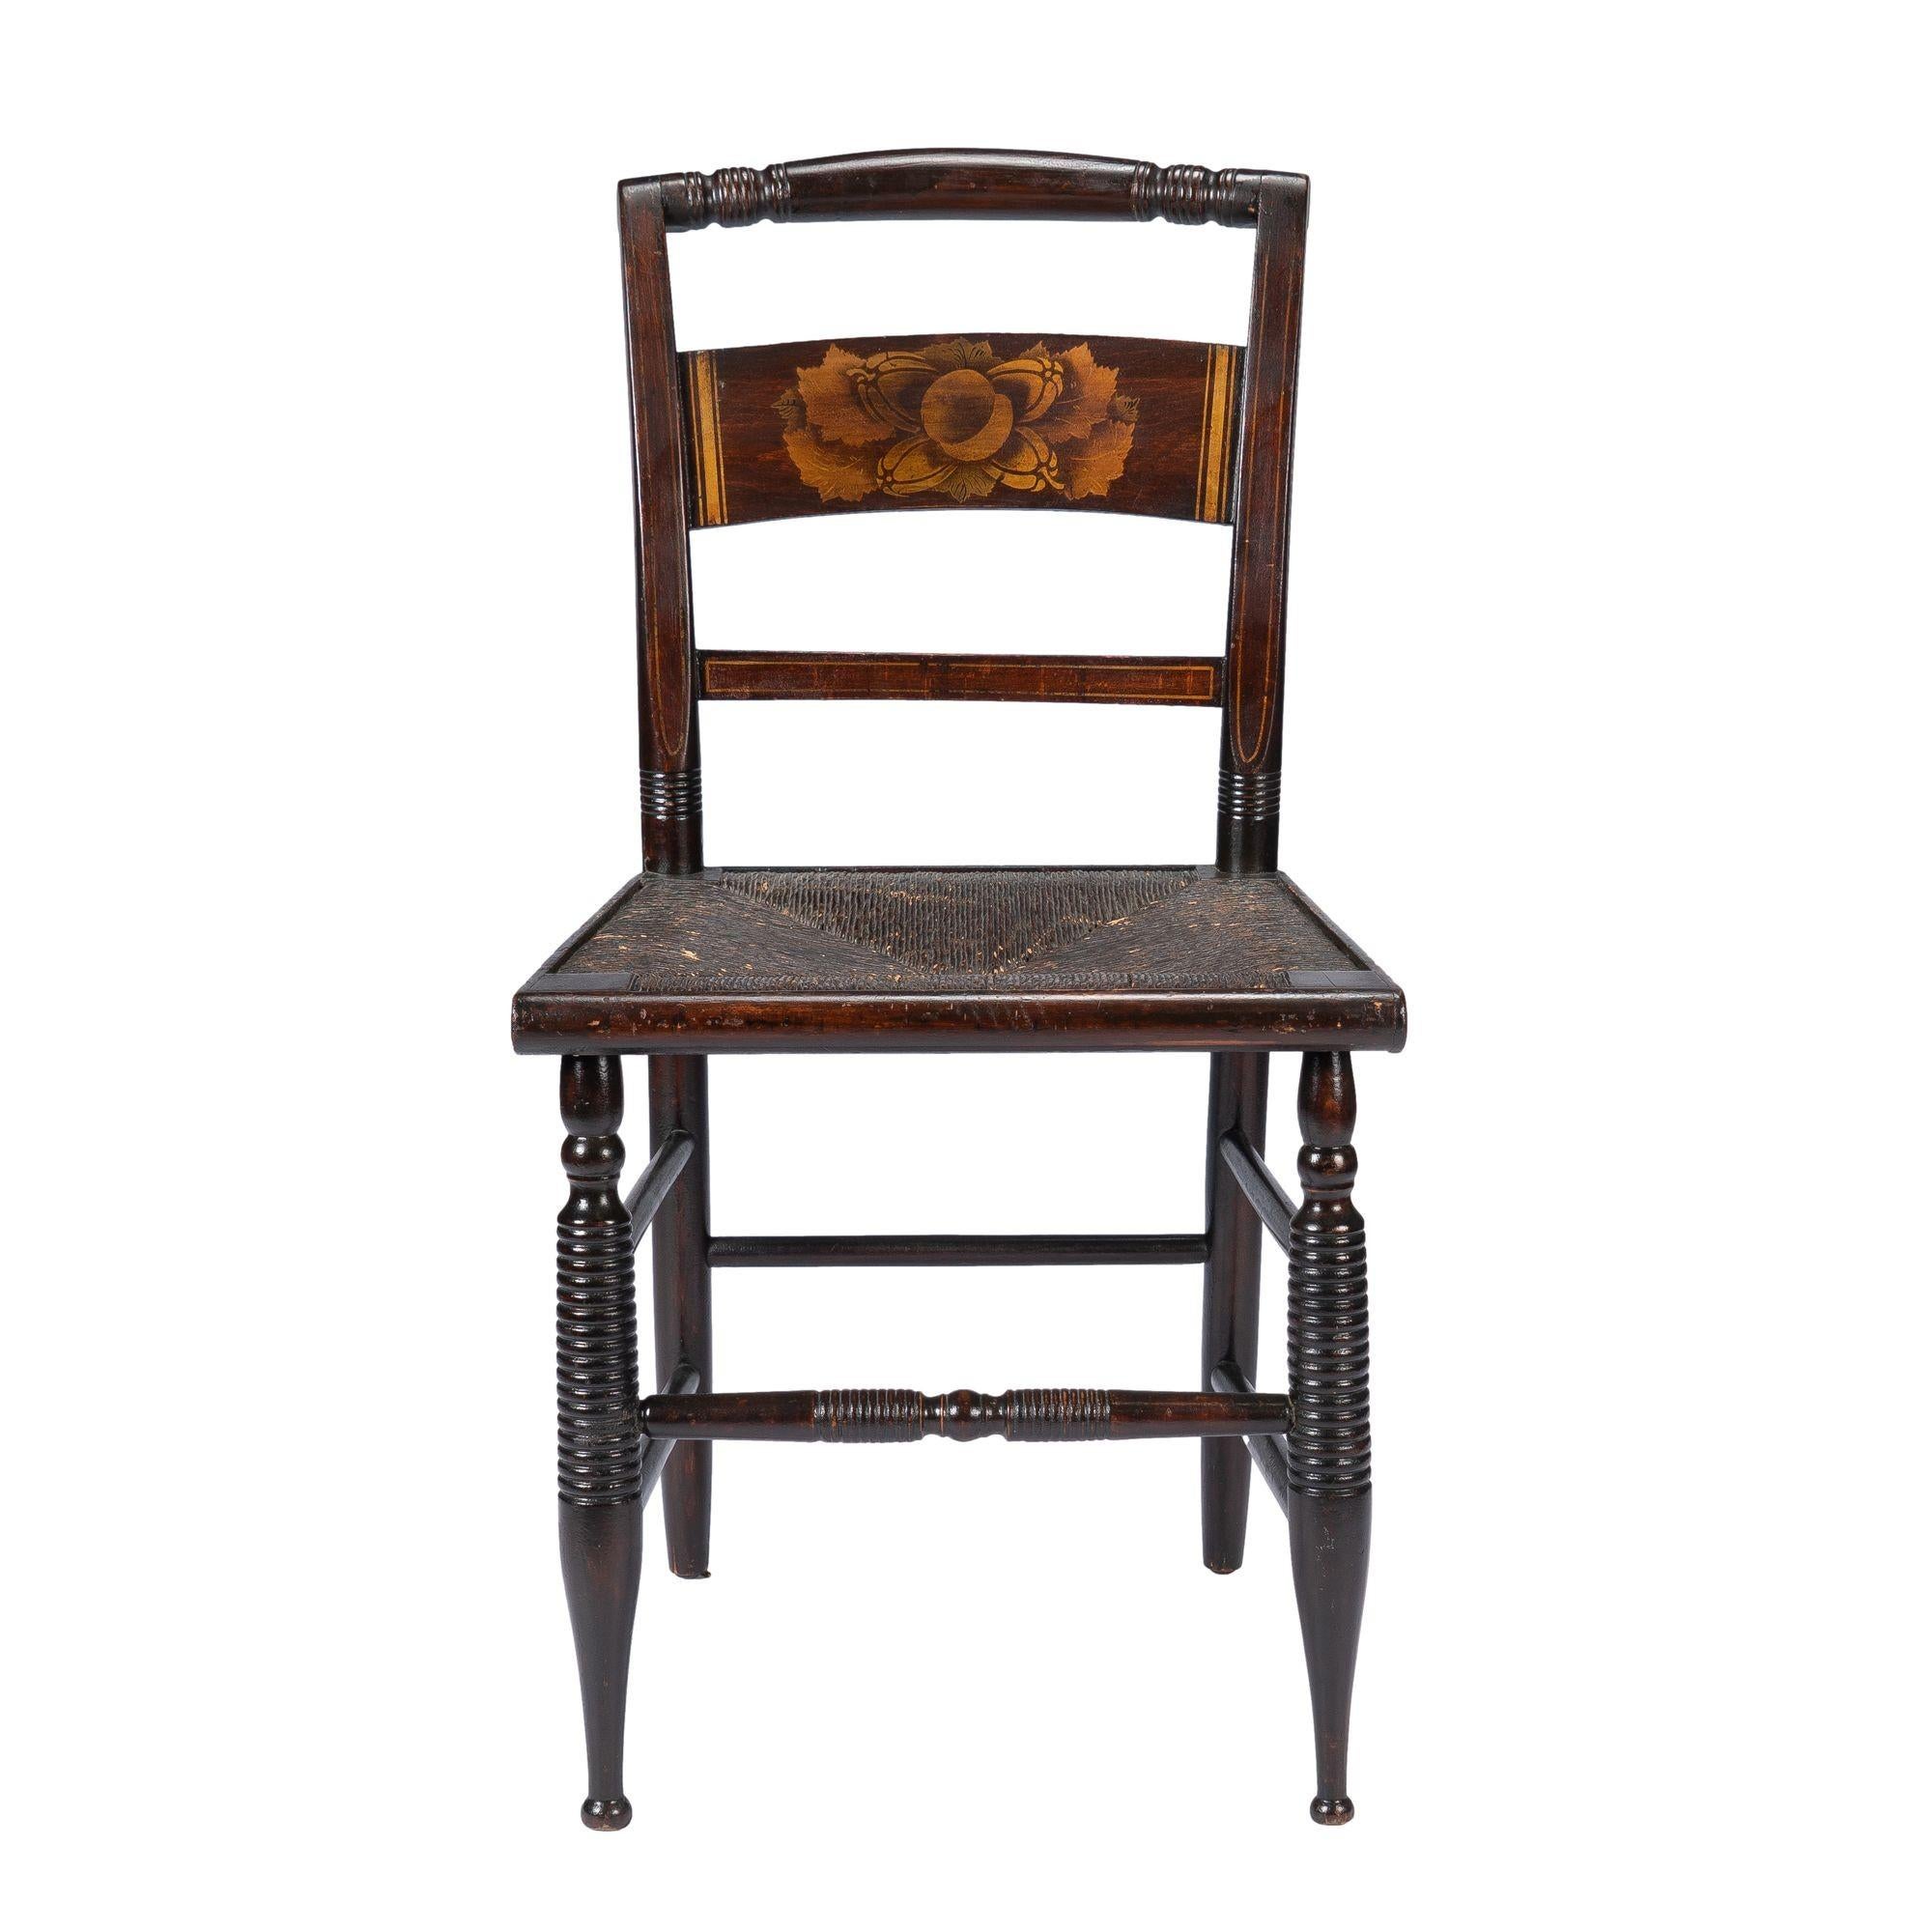 American Sheraton painted and bronze powder stencil decorated, Hitchcock-type rush seat fancy chair.

American, Connecticut Valley, circa 1820.

Dimensions: 17-1/2” W x 18” D x 33-3/4” H
15” (seat depth)
17-3/4” (seat height)